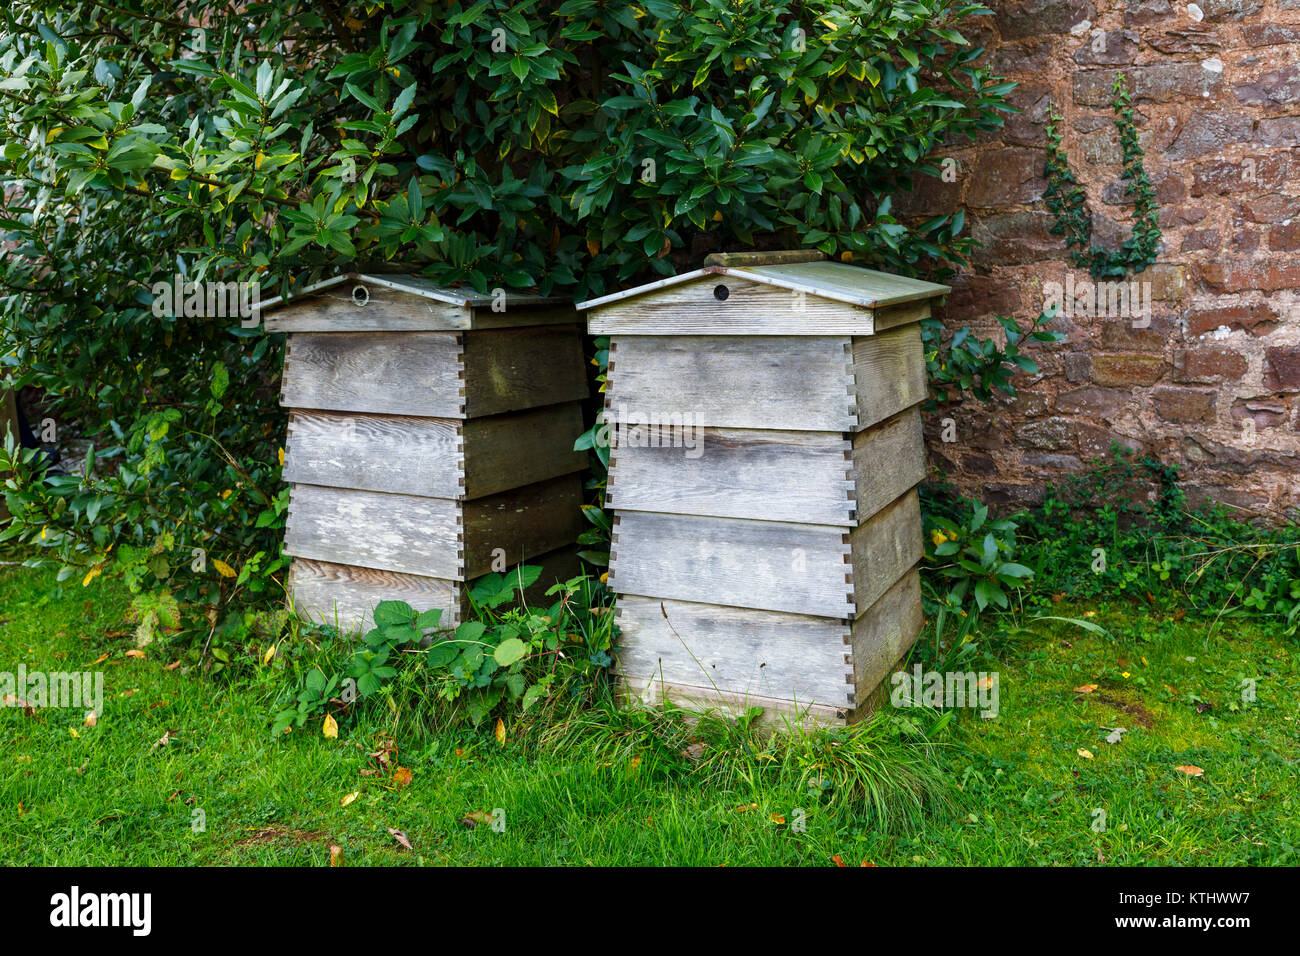 Briitsh beekeeping (apiculture): two typical traditional old-fashioned wooden beehives, classic design, in a walled garden against a brick wall Stock Photo